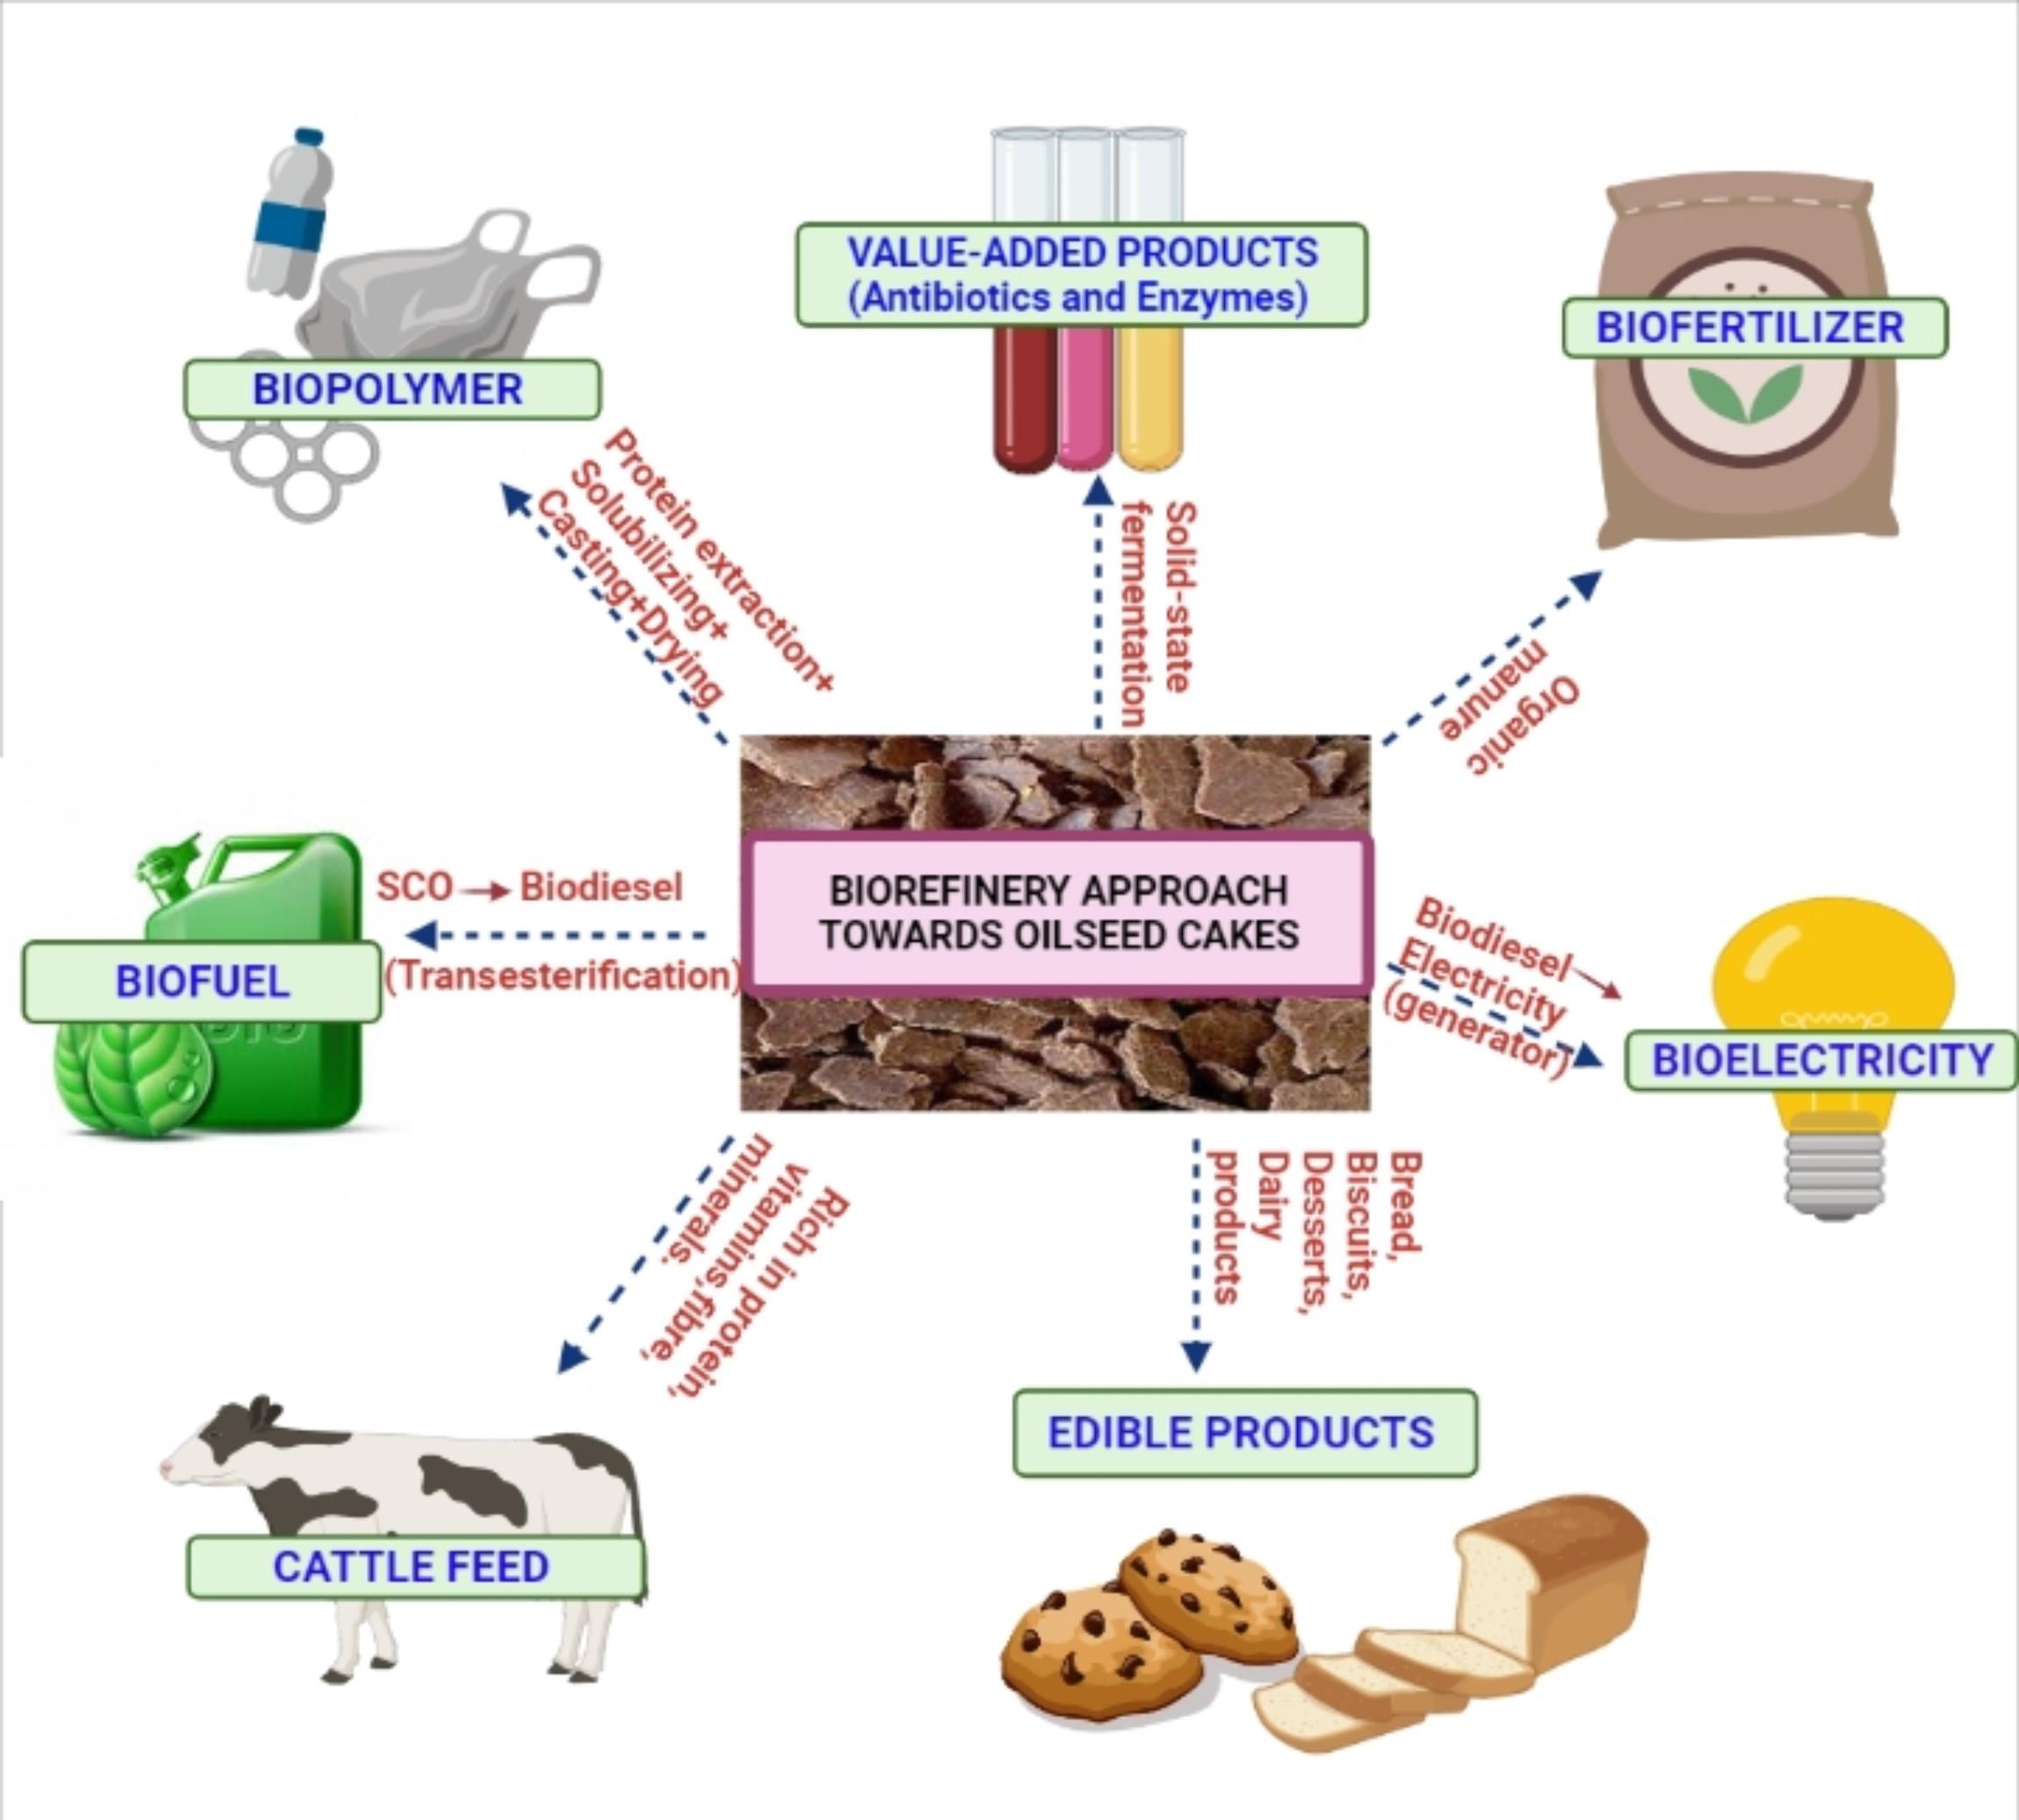 A comprehensive review on oilseed cakes and their potential as a feedstock for integrated biorefinery